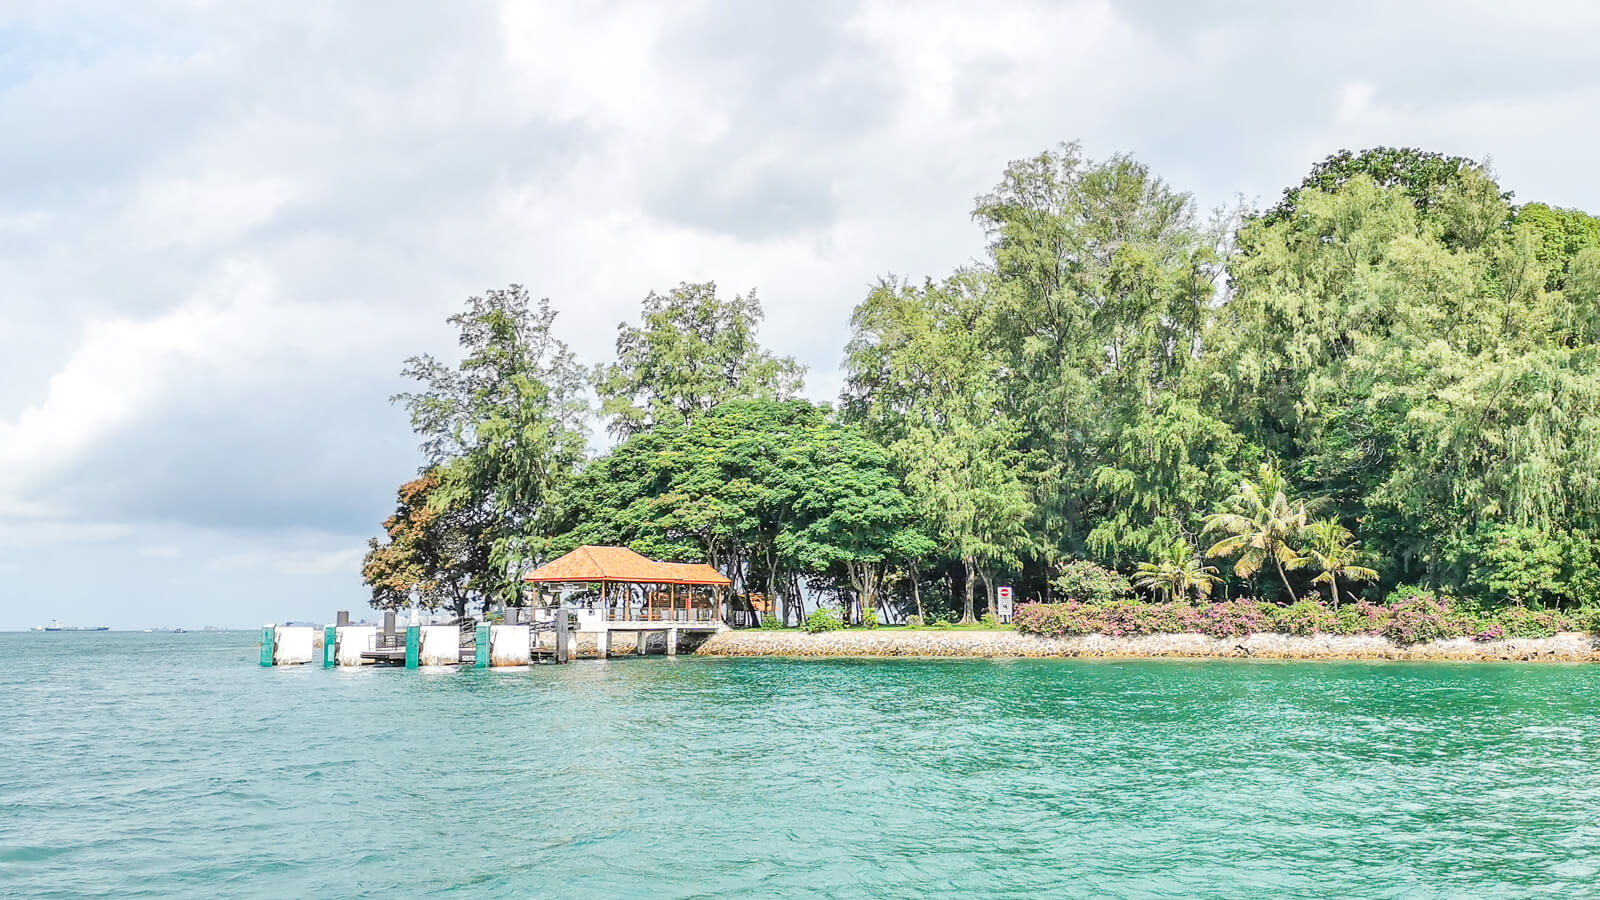 6 Fun Things to do on Sisters' Islands, Singapore